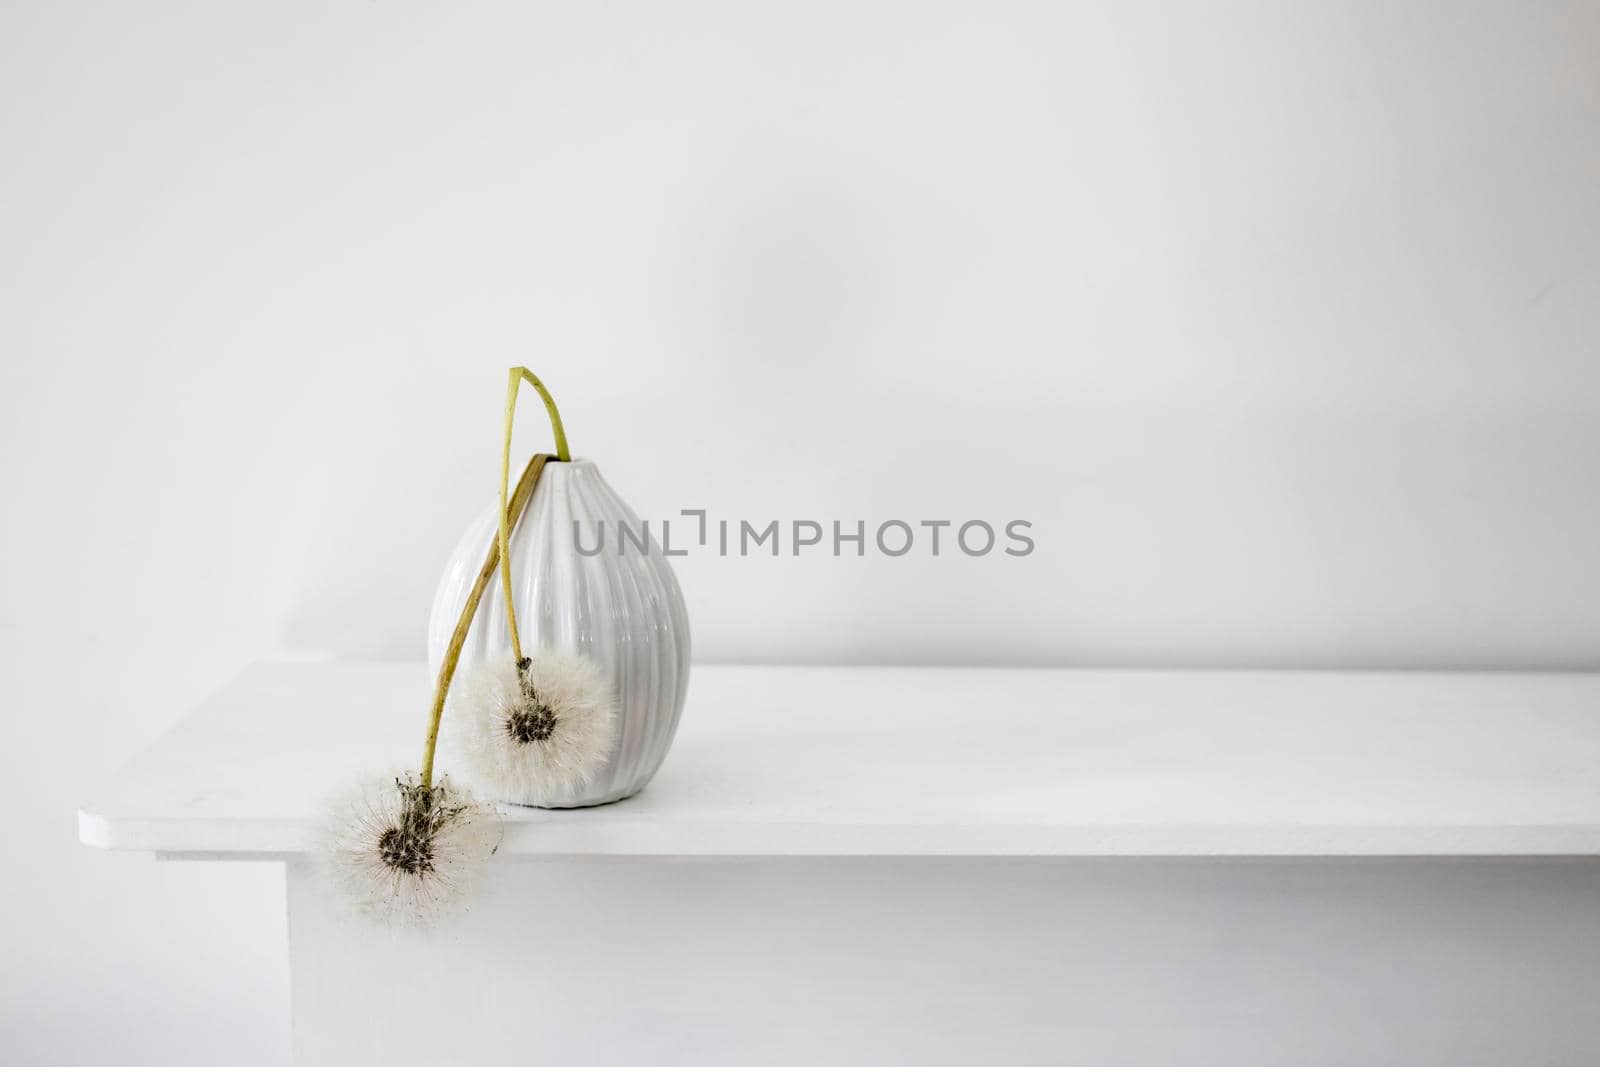 A seventies-style fluted vase with two fluffy dandelions is on the dresser. White on white. Space for text.